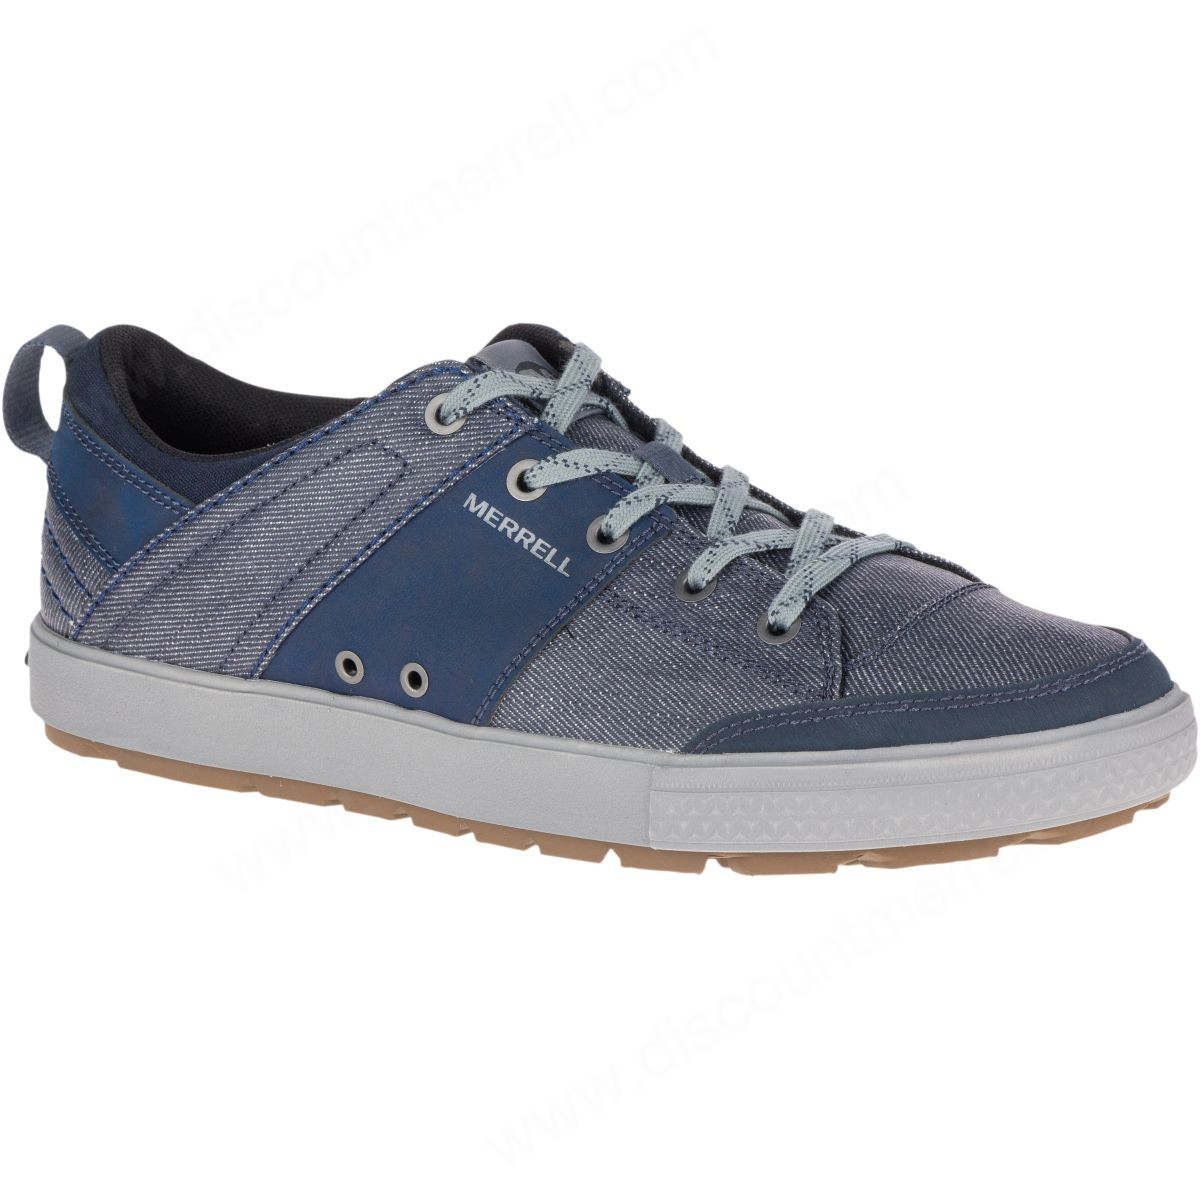 Merrell Mens's Rant Discovery Lace Canvas Denim - Merrell Mens's Rant Discovery Lace Canvas Denim